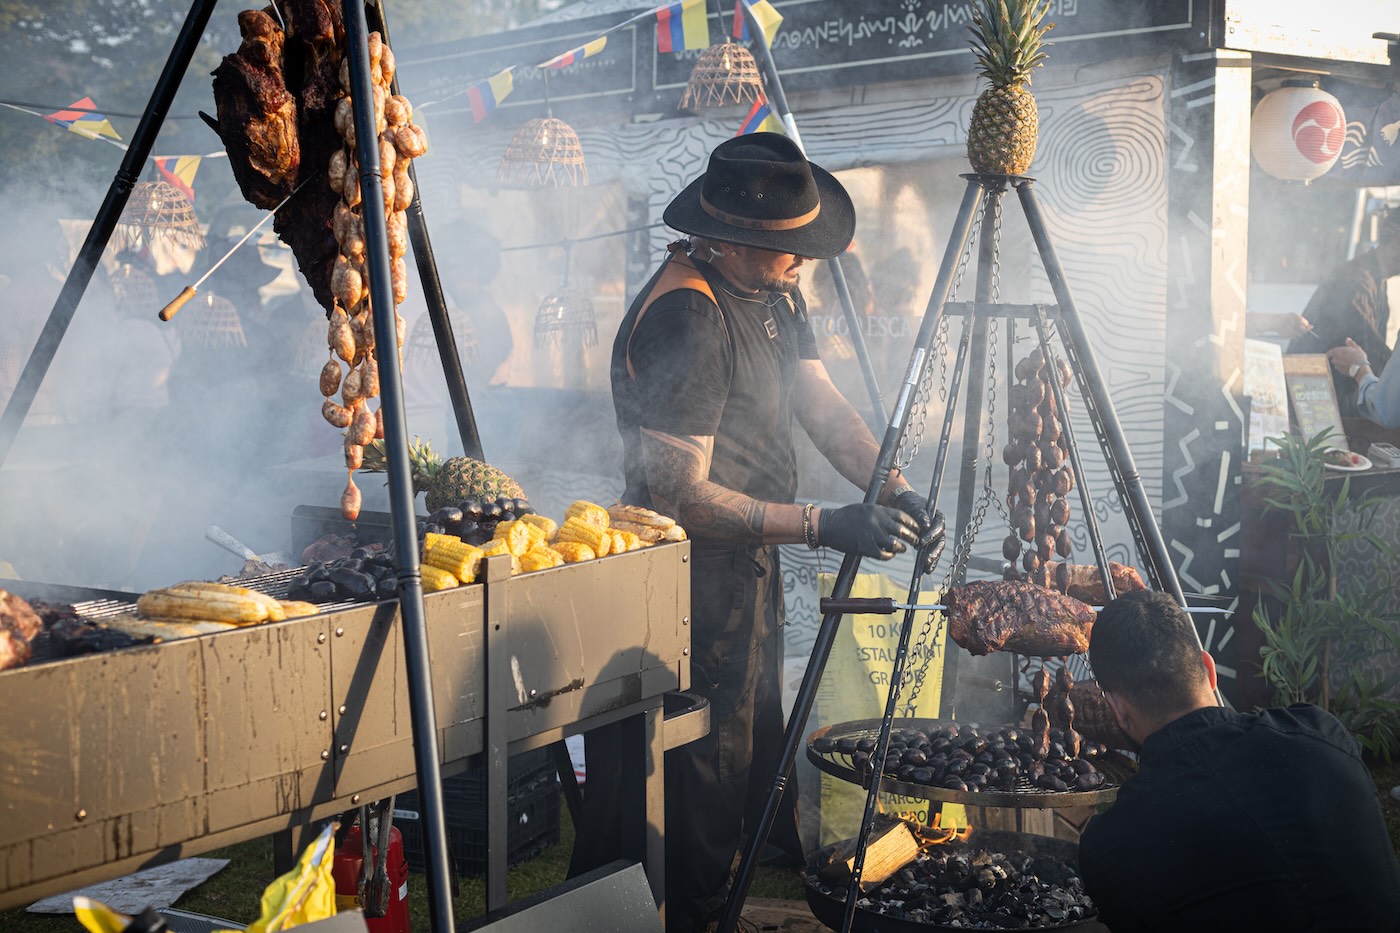 Man barbecuing meat at the Rollende Keukens - Photo by Joel Levy